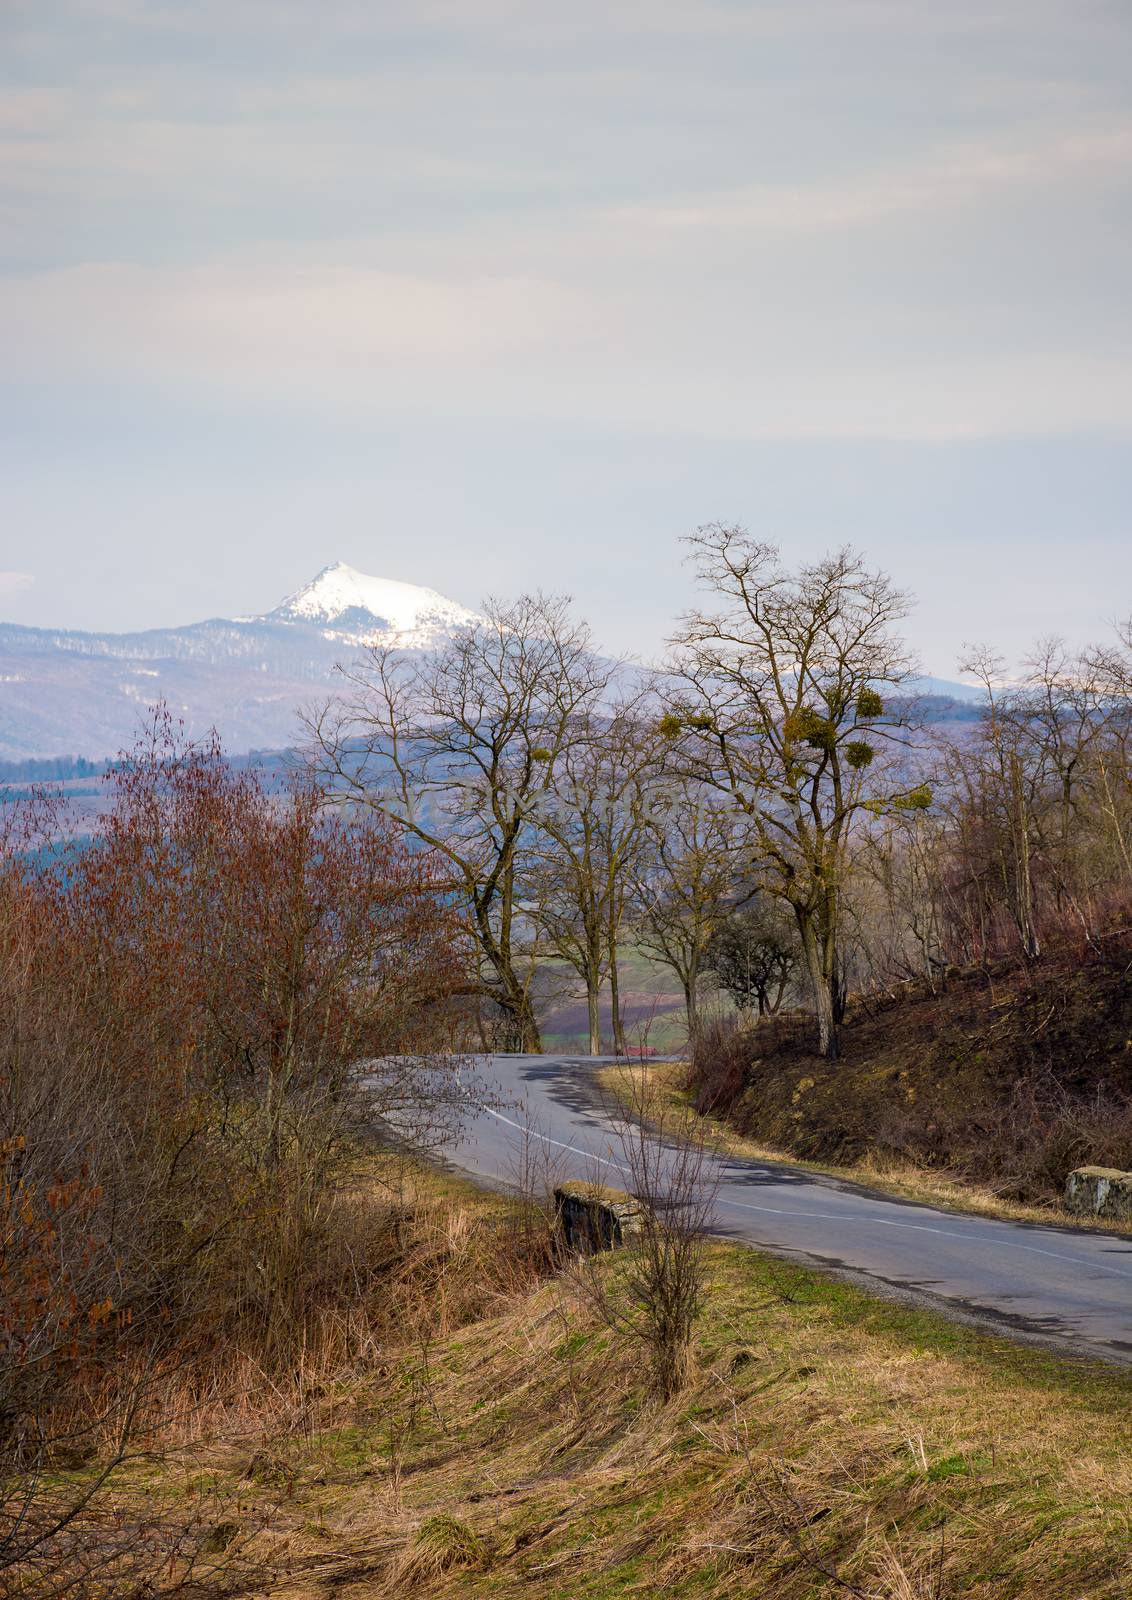 country road in to the mountains with snowy peak by Pellinni